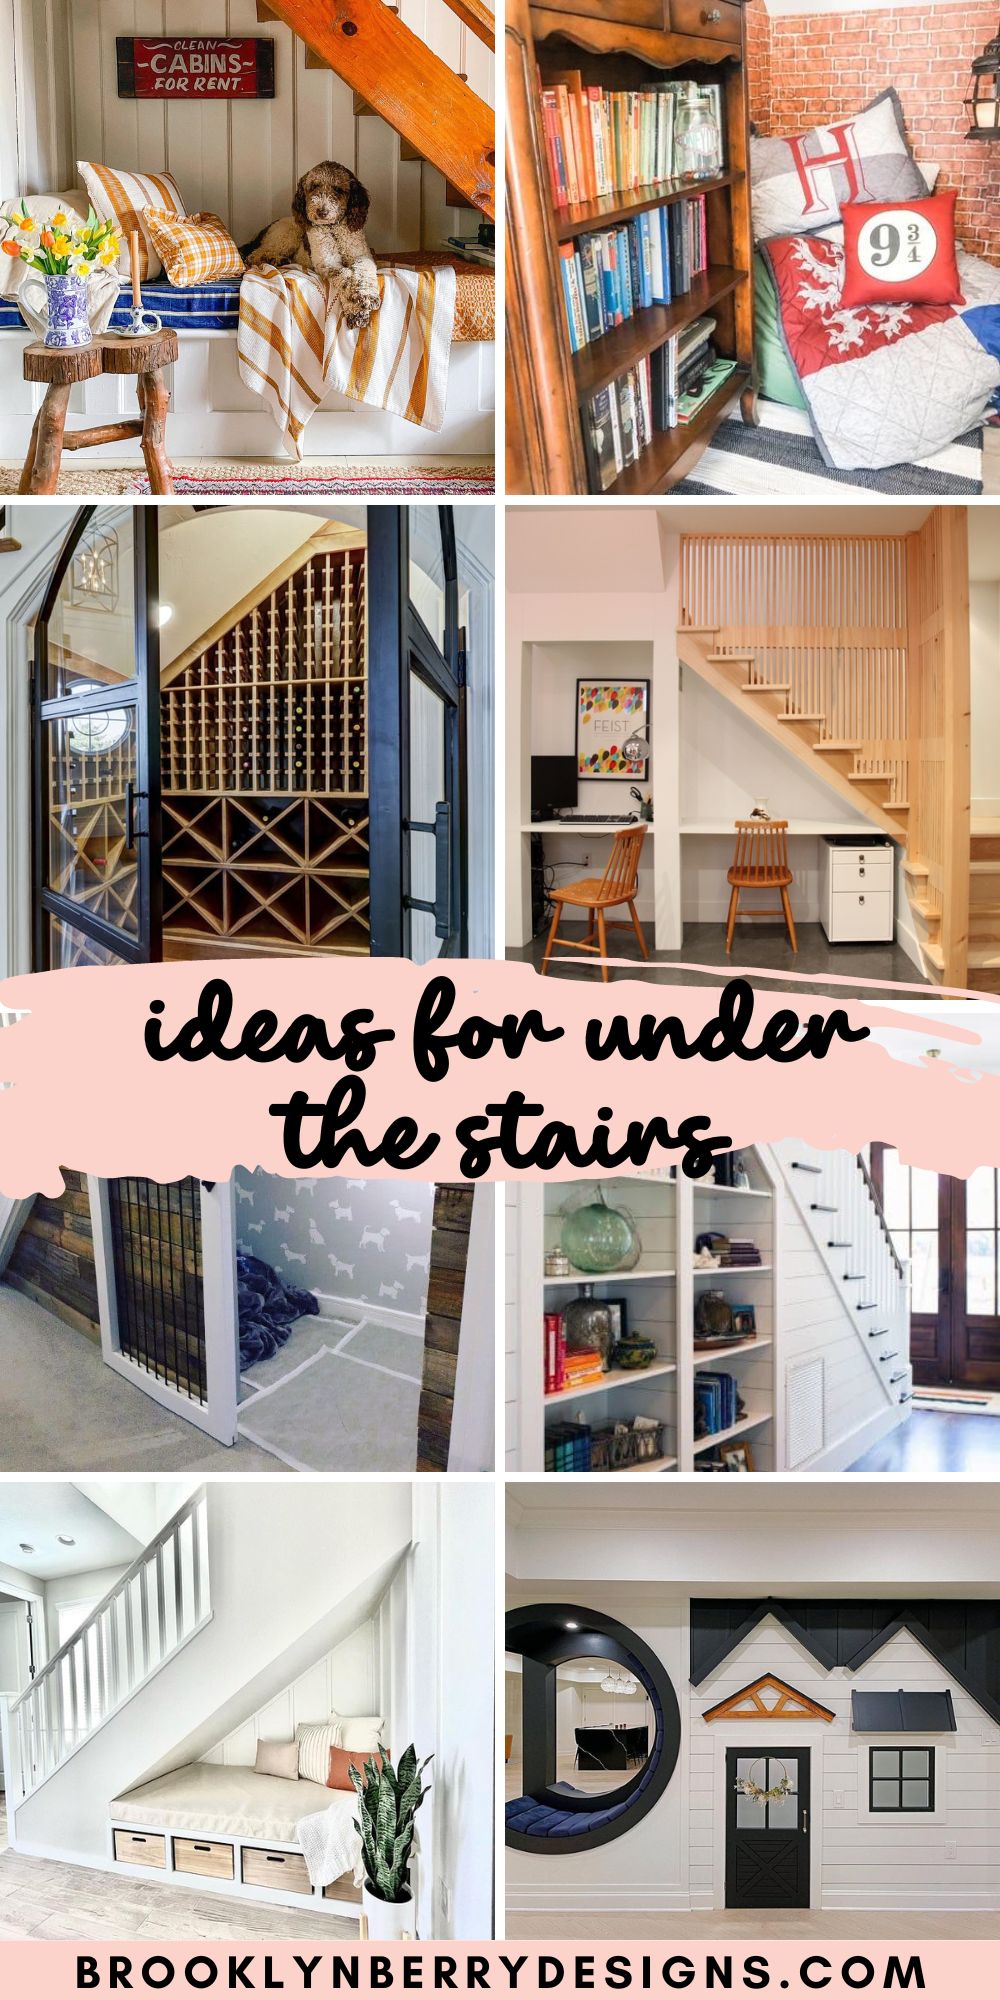 collage image of ideas to use the space under the stairs